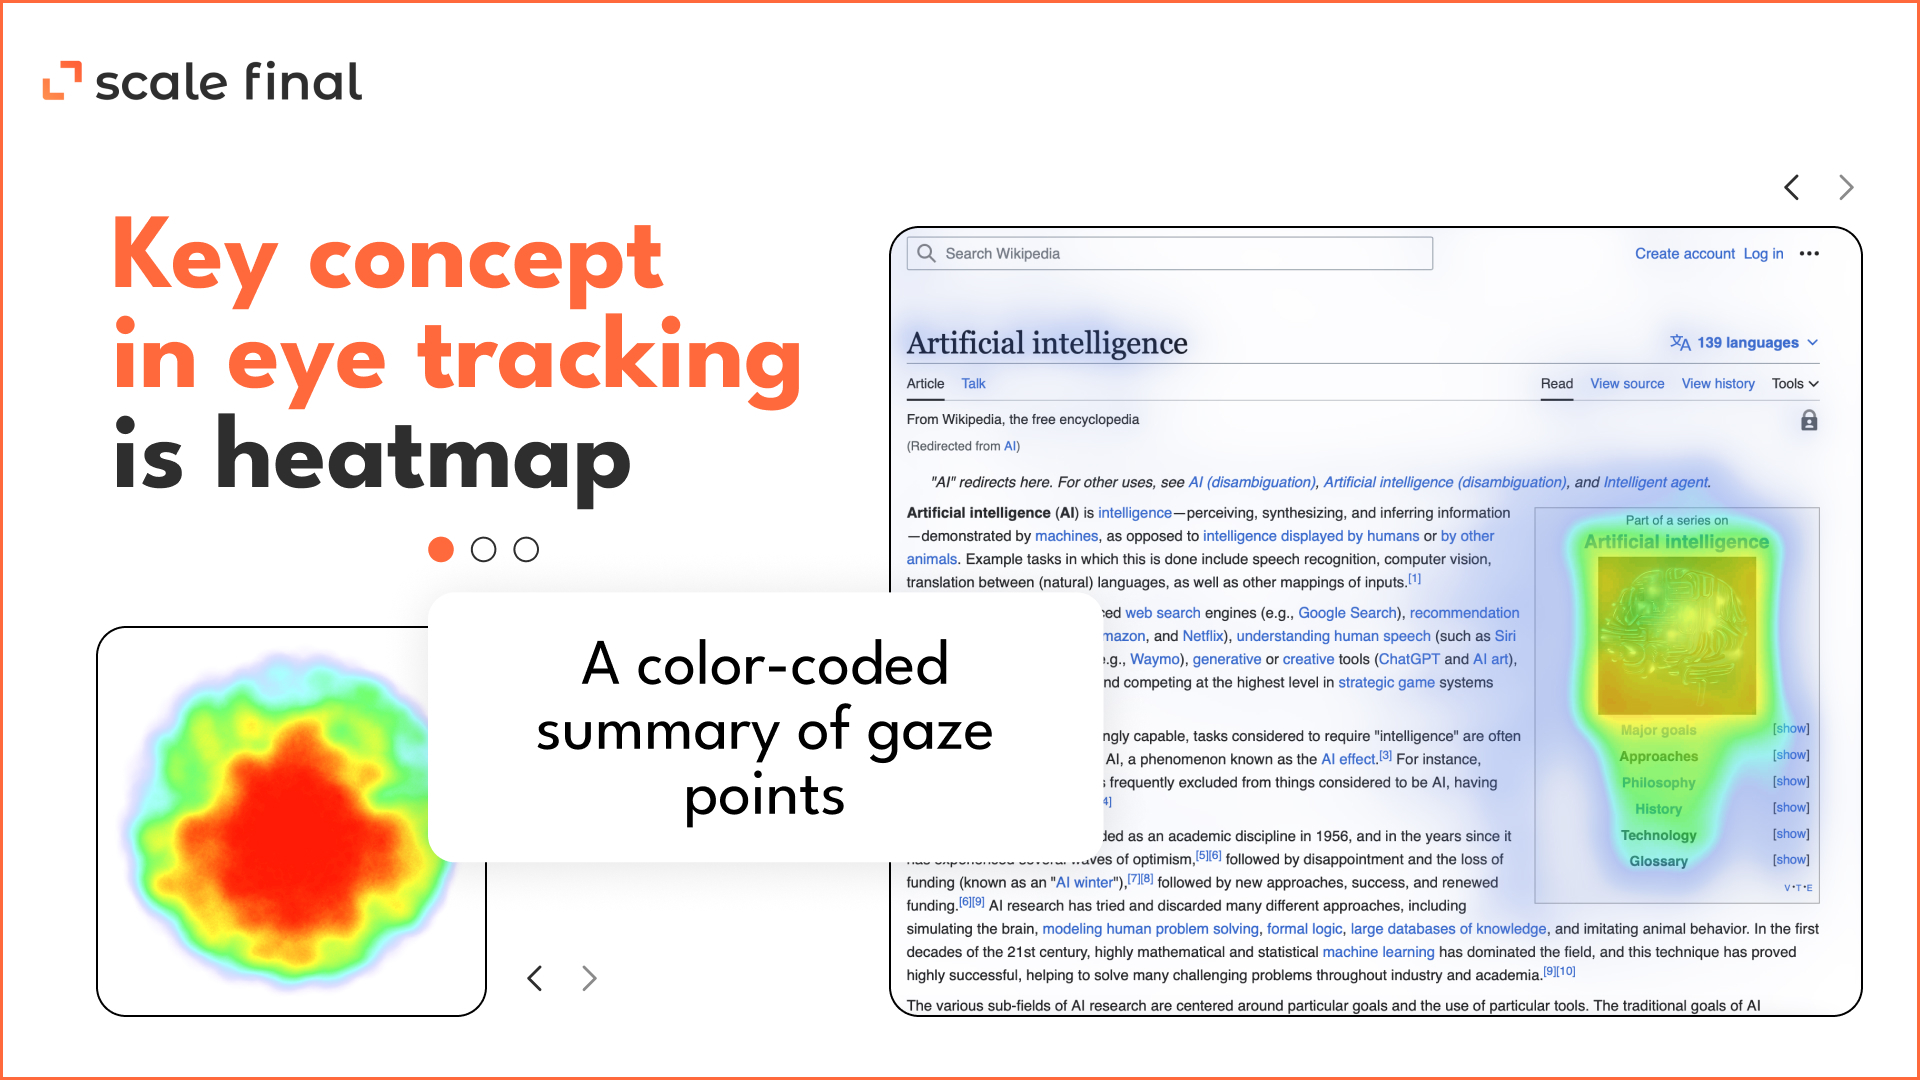 key concept in eye tracking is heatmap - a color-coded summary of gaze points.